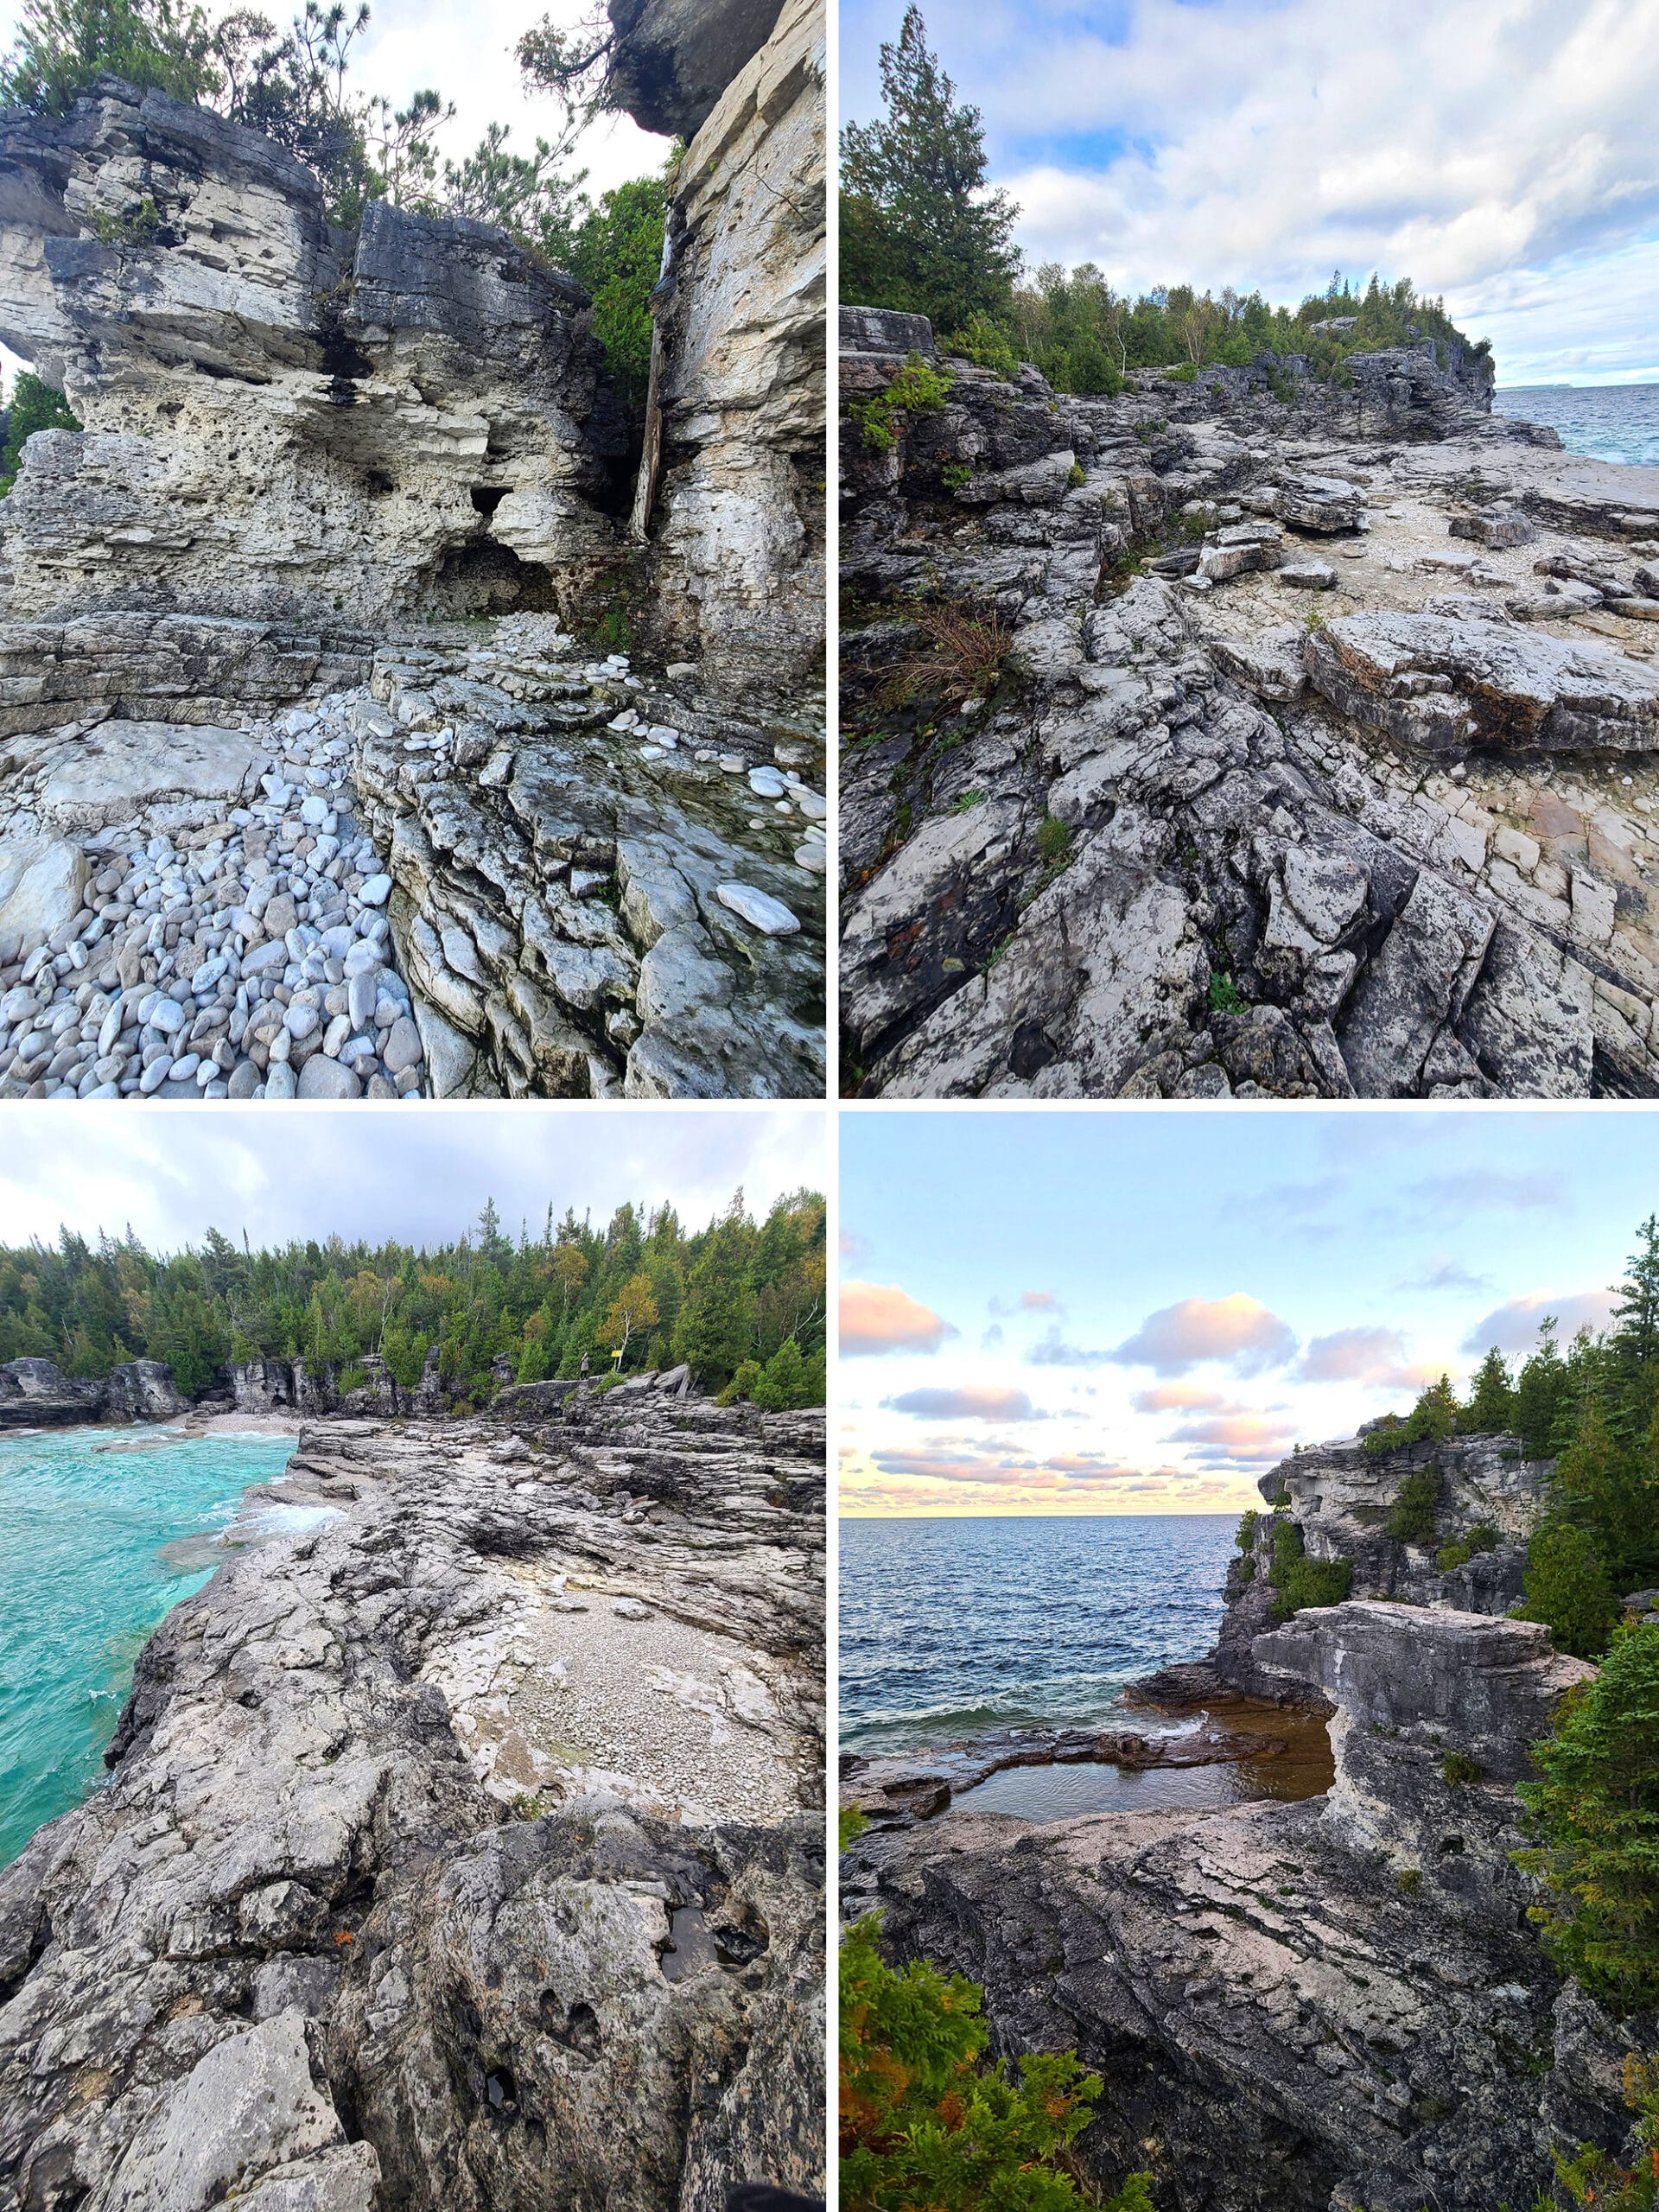 4 part image showing different views of the turquoise water and the cliffs at Indian Head Cove.